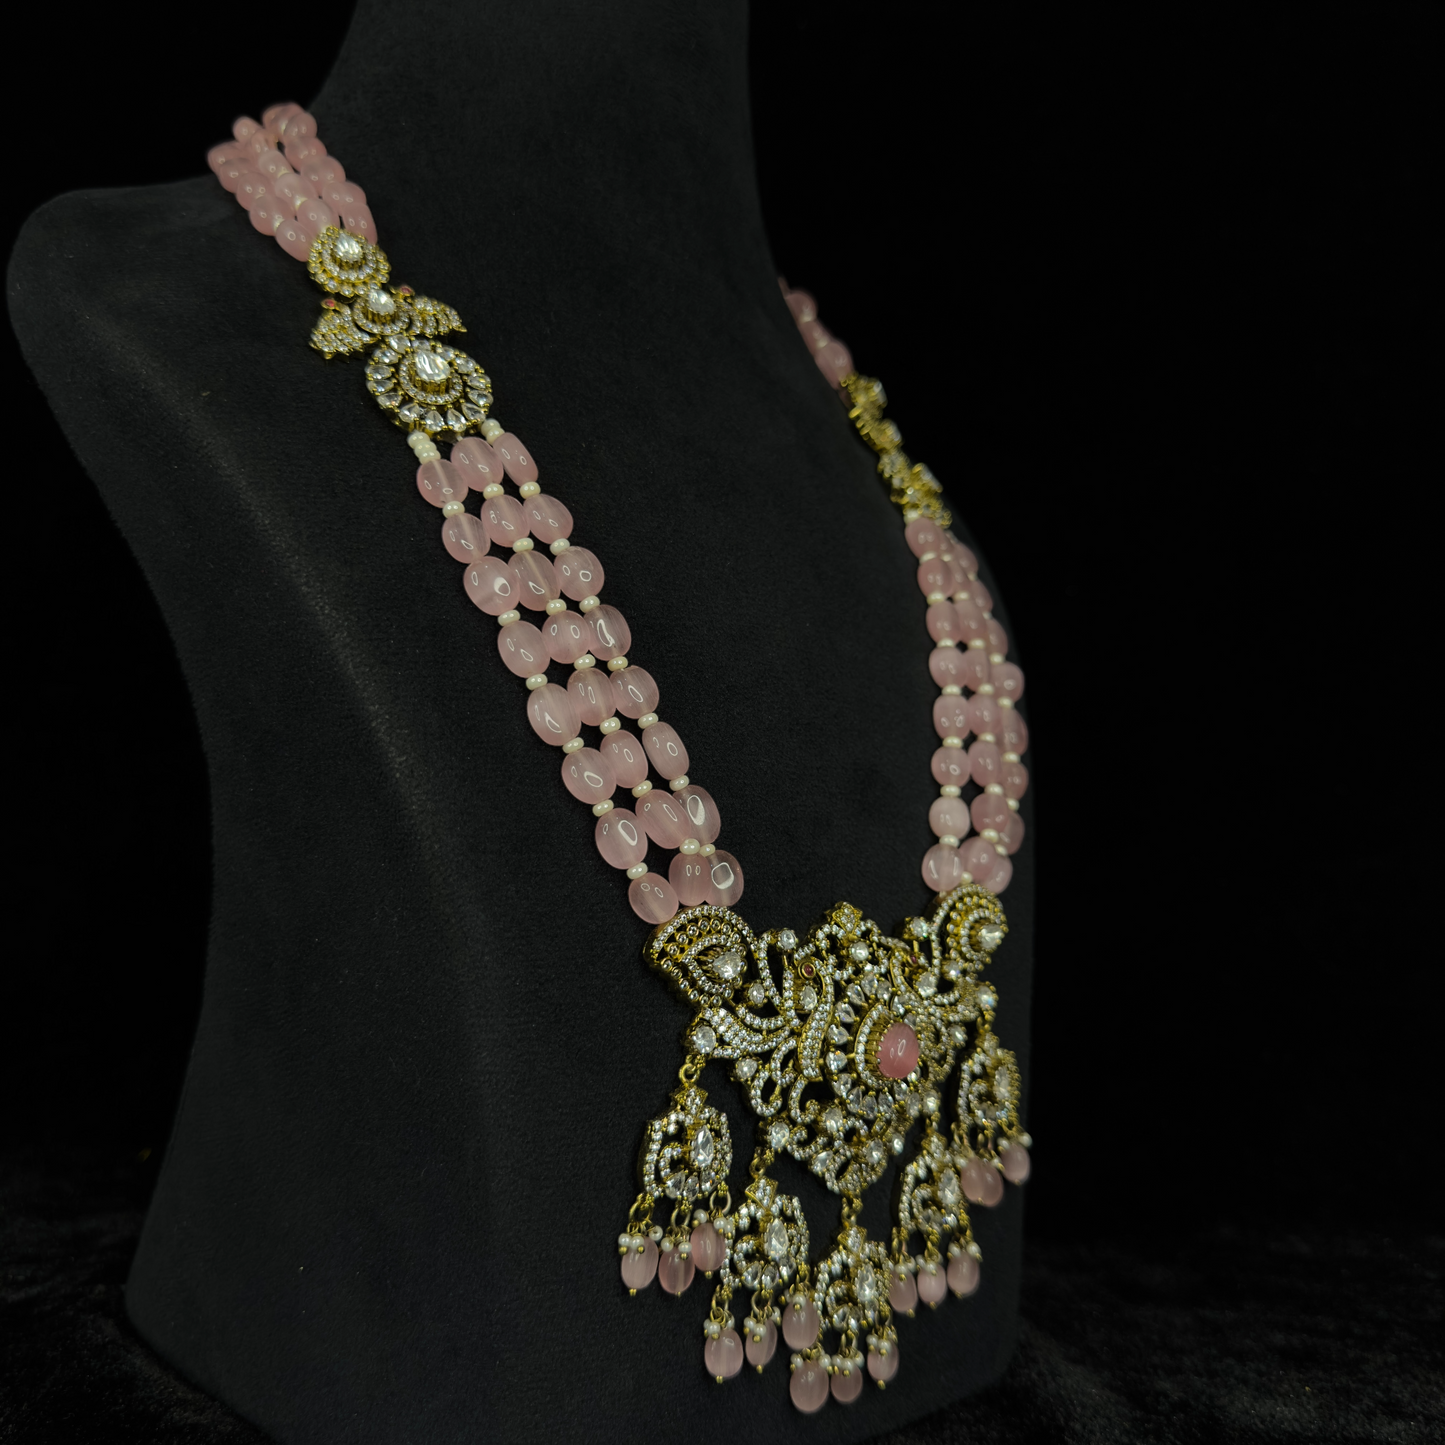 Lush Pink Victorian Beads Necklace set